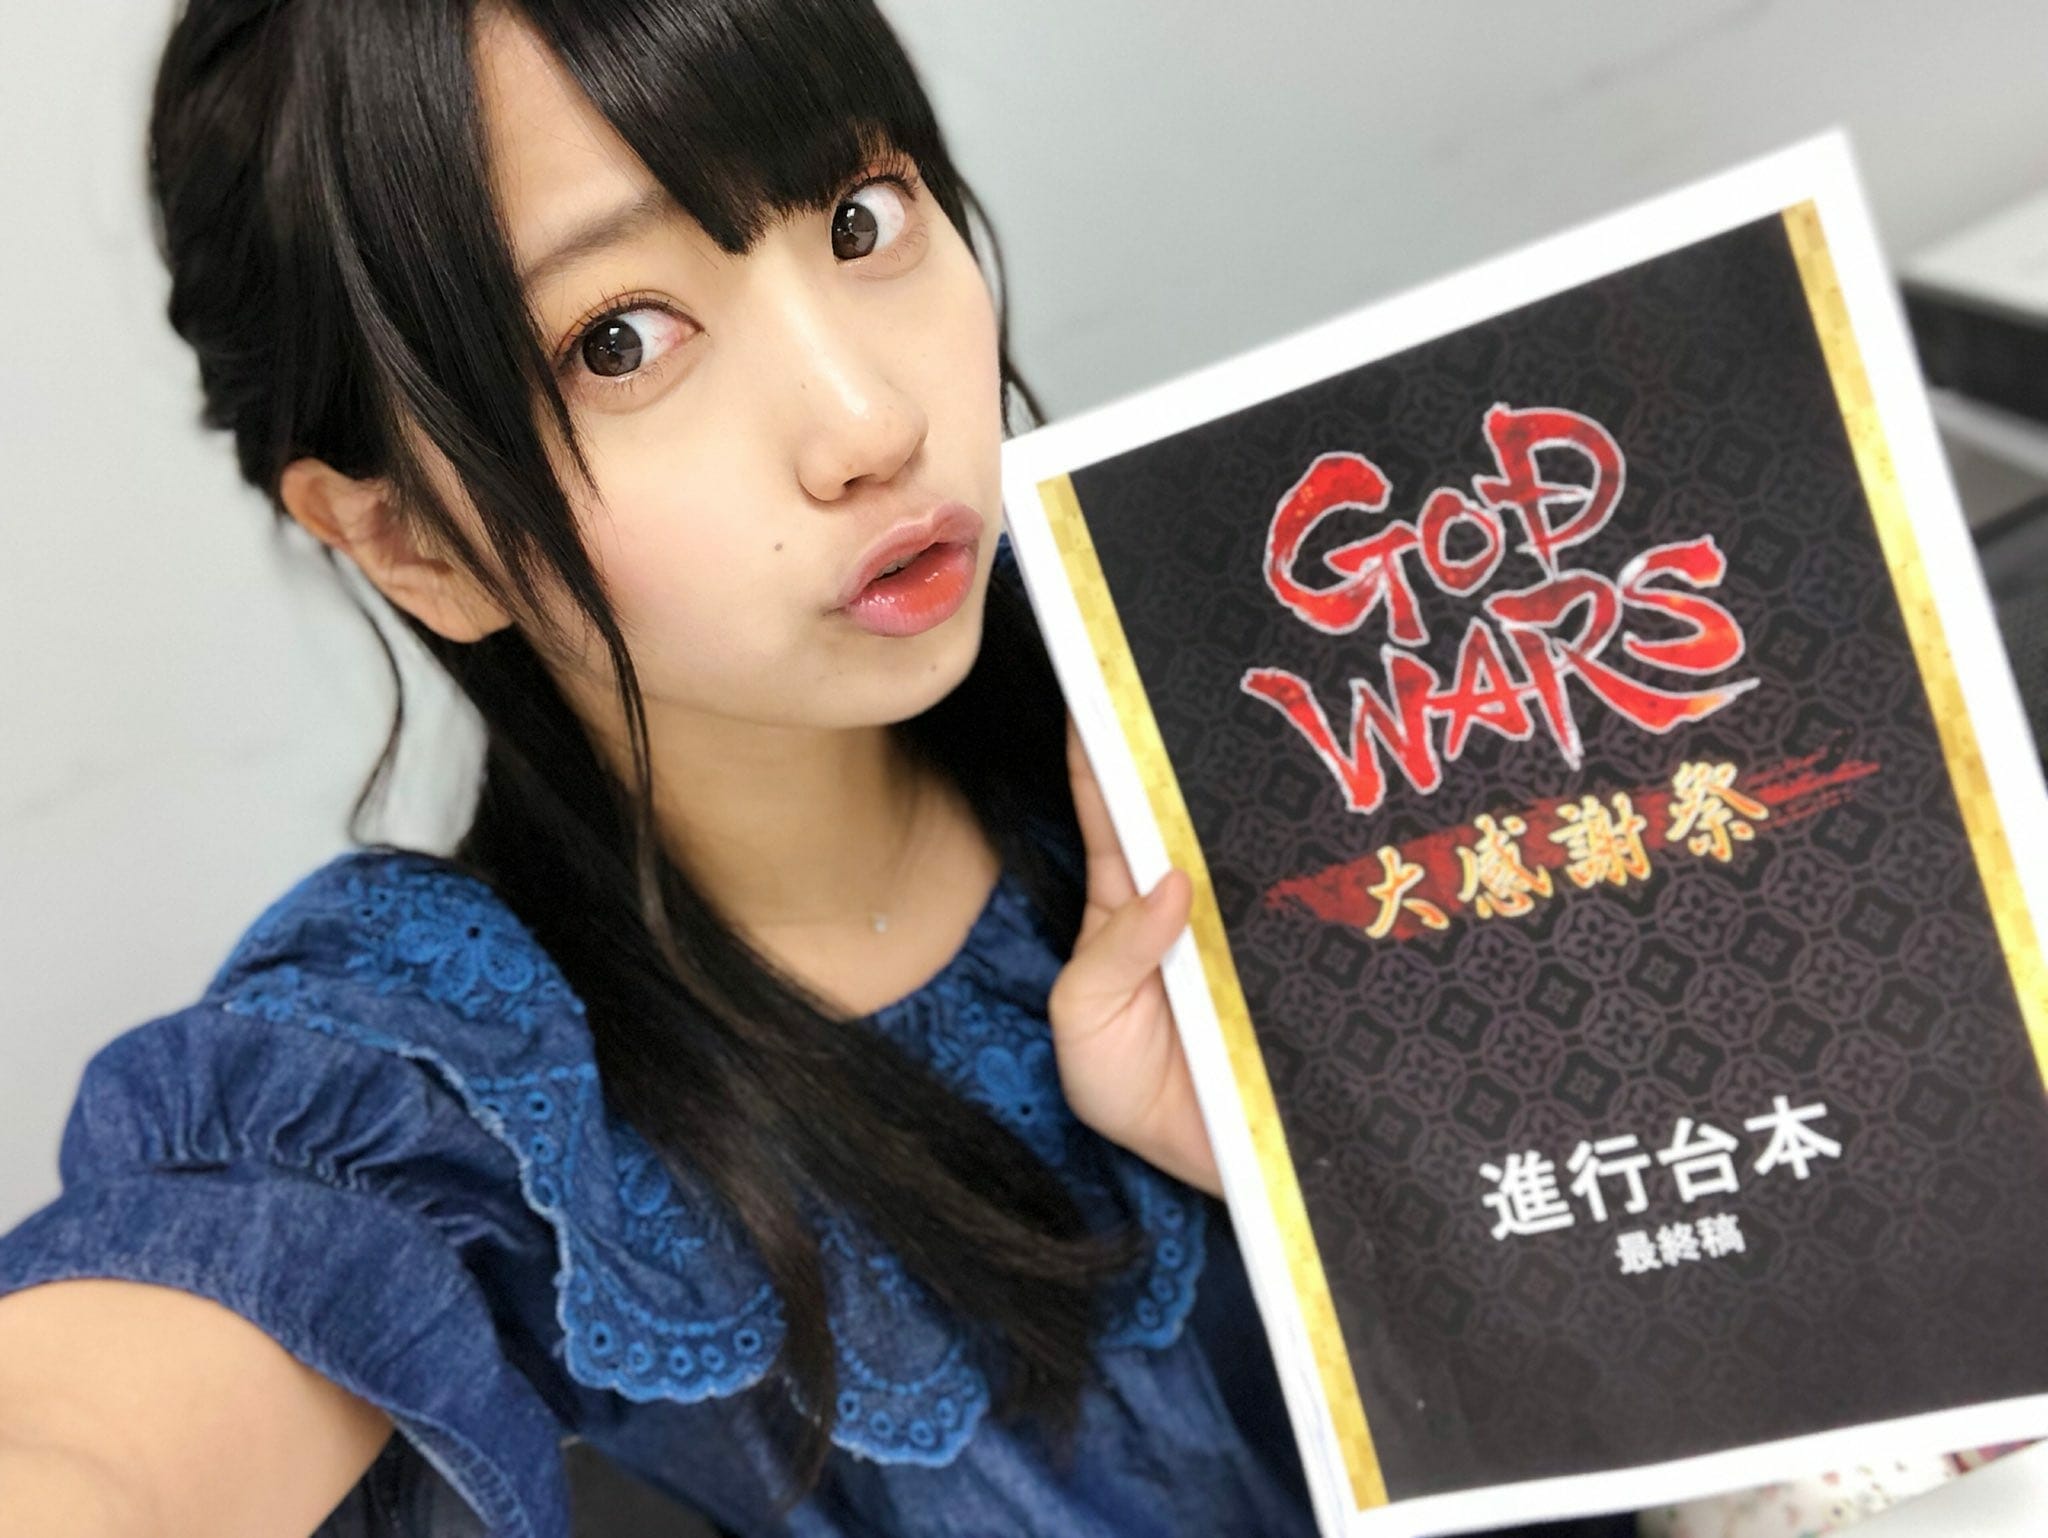 God Wars 2 Official Confirmation on Twitter